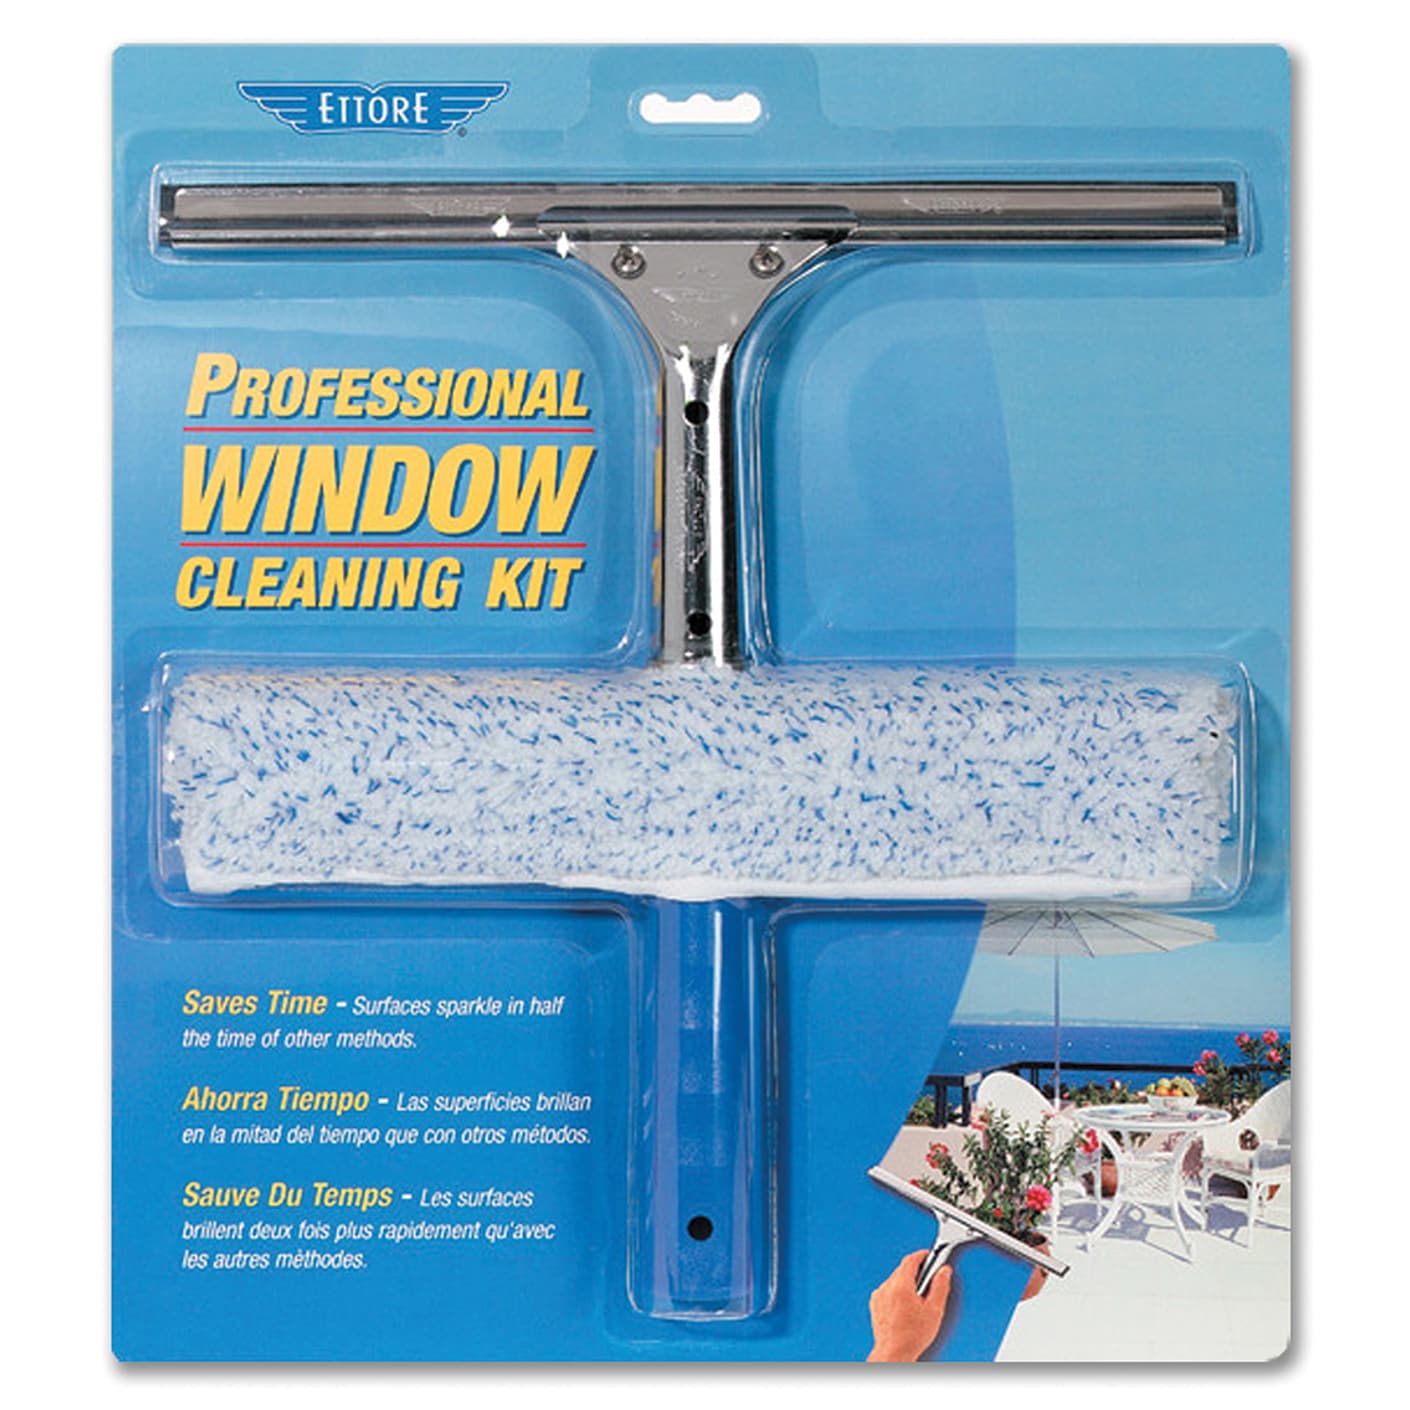 Professional Window Cleaning Kit Ettore (E04991): Window Cleaning Kits